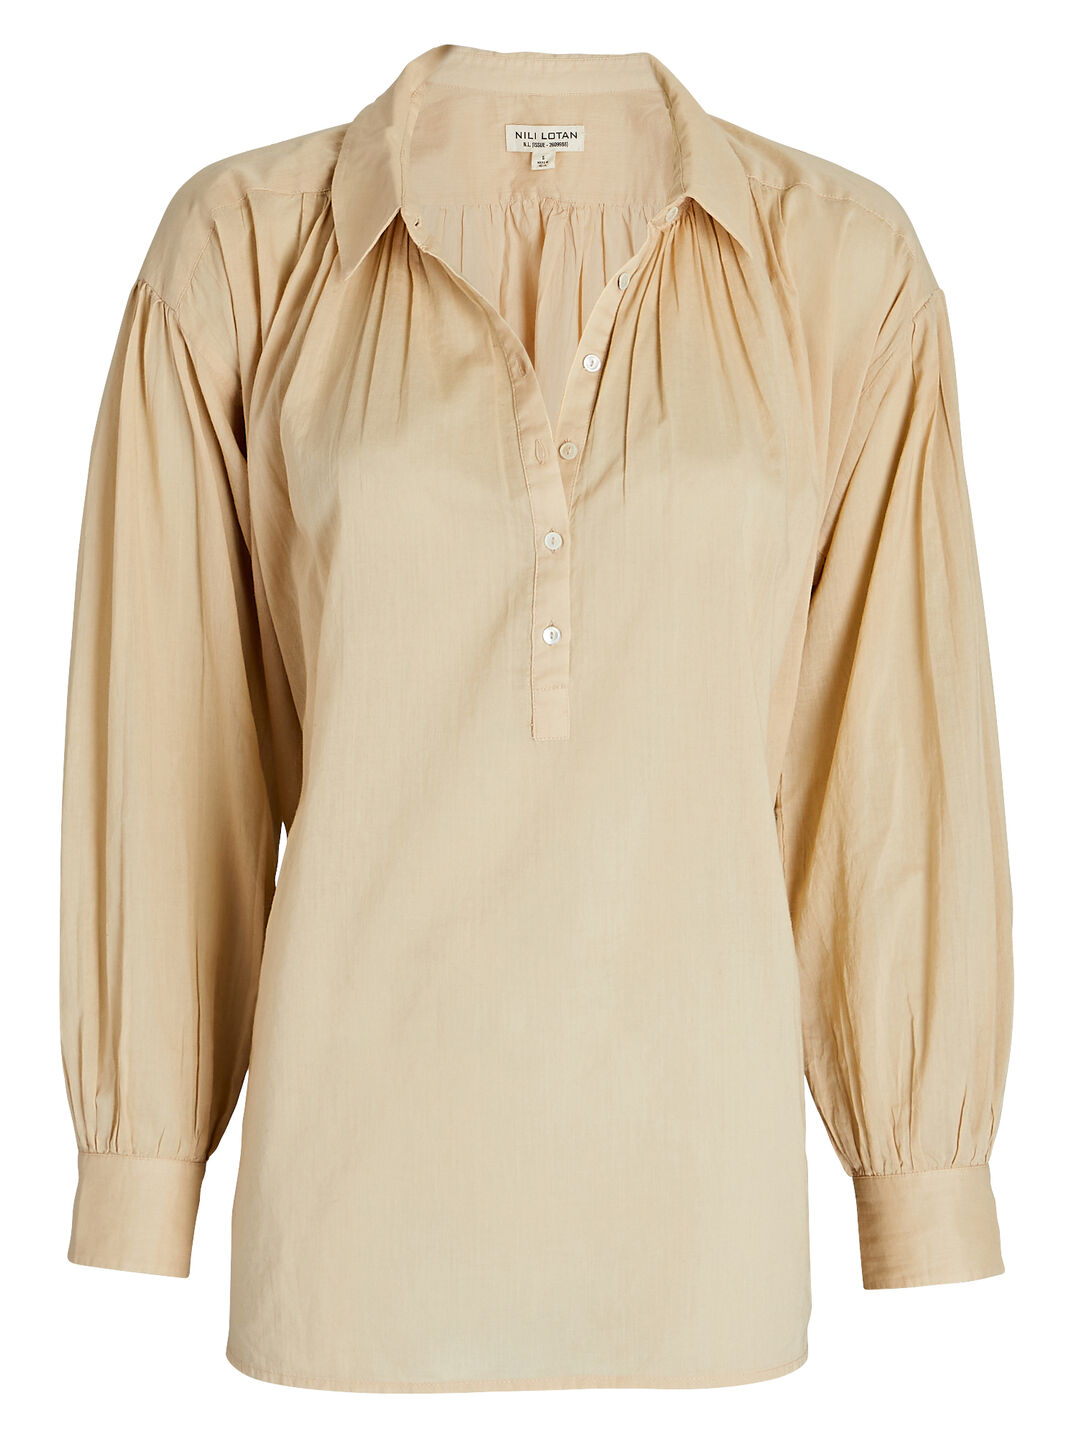 Miles Gathered Voile Blouse